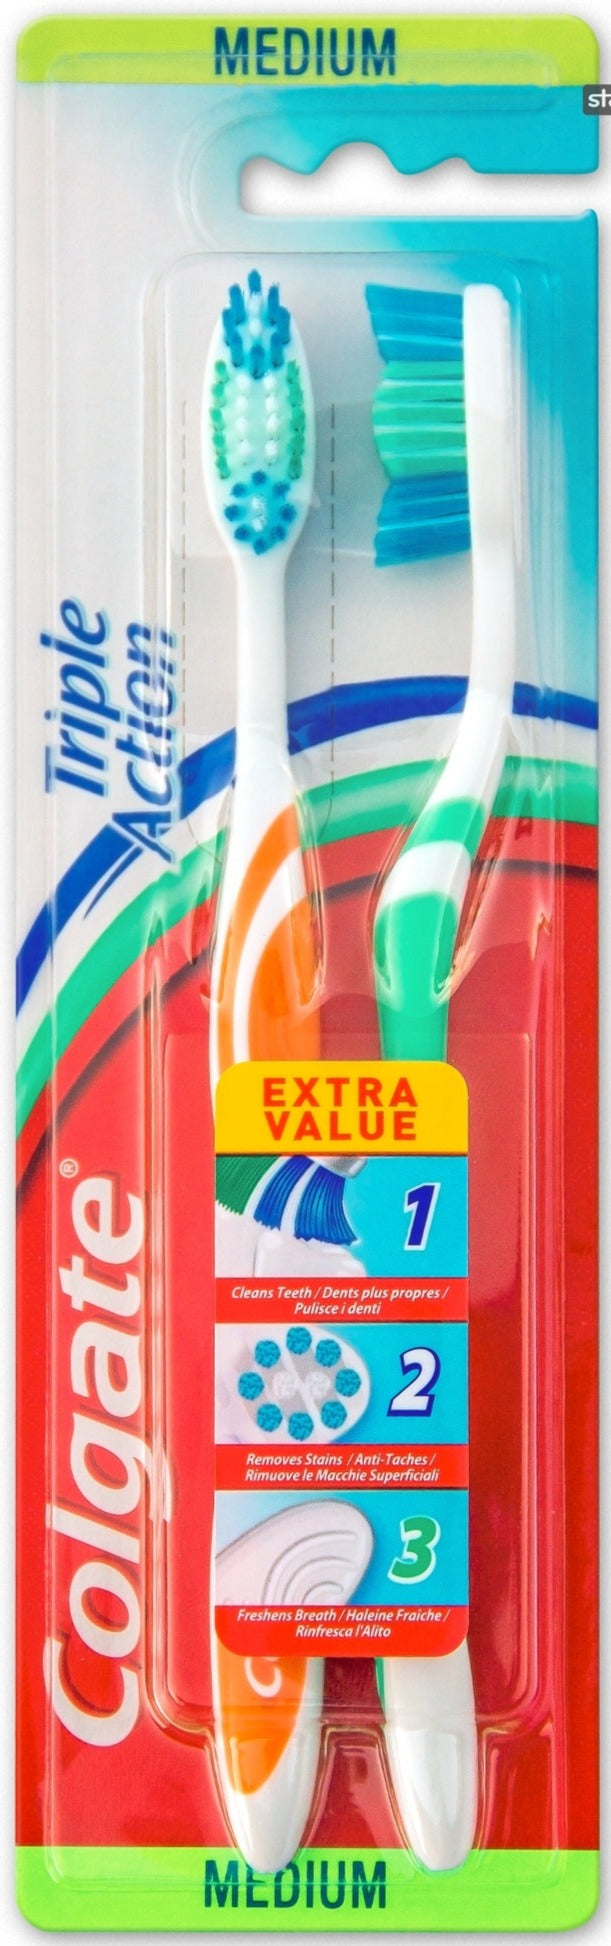 Colgate Triple Action Twin Toothbrush